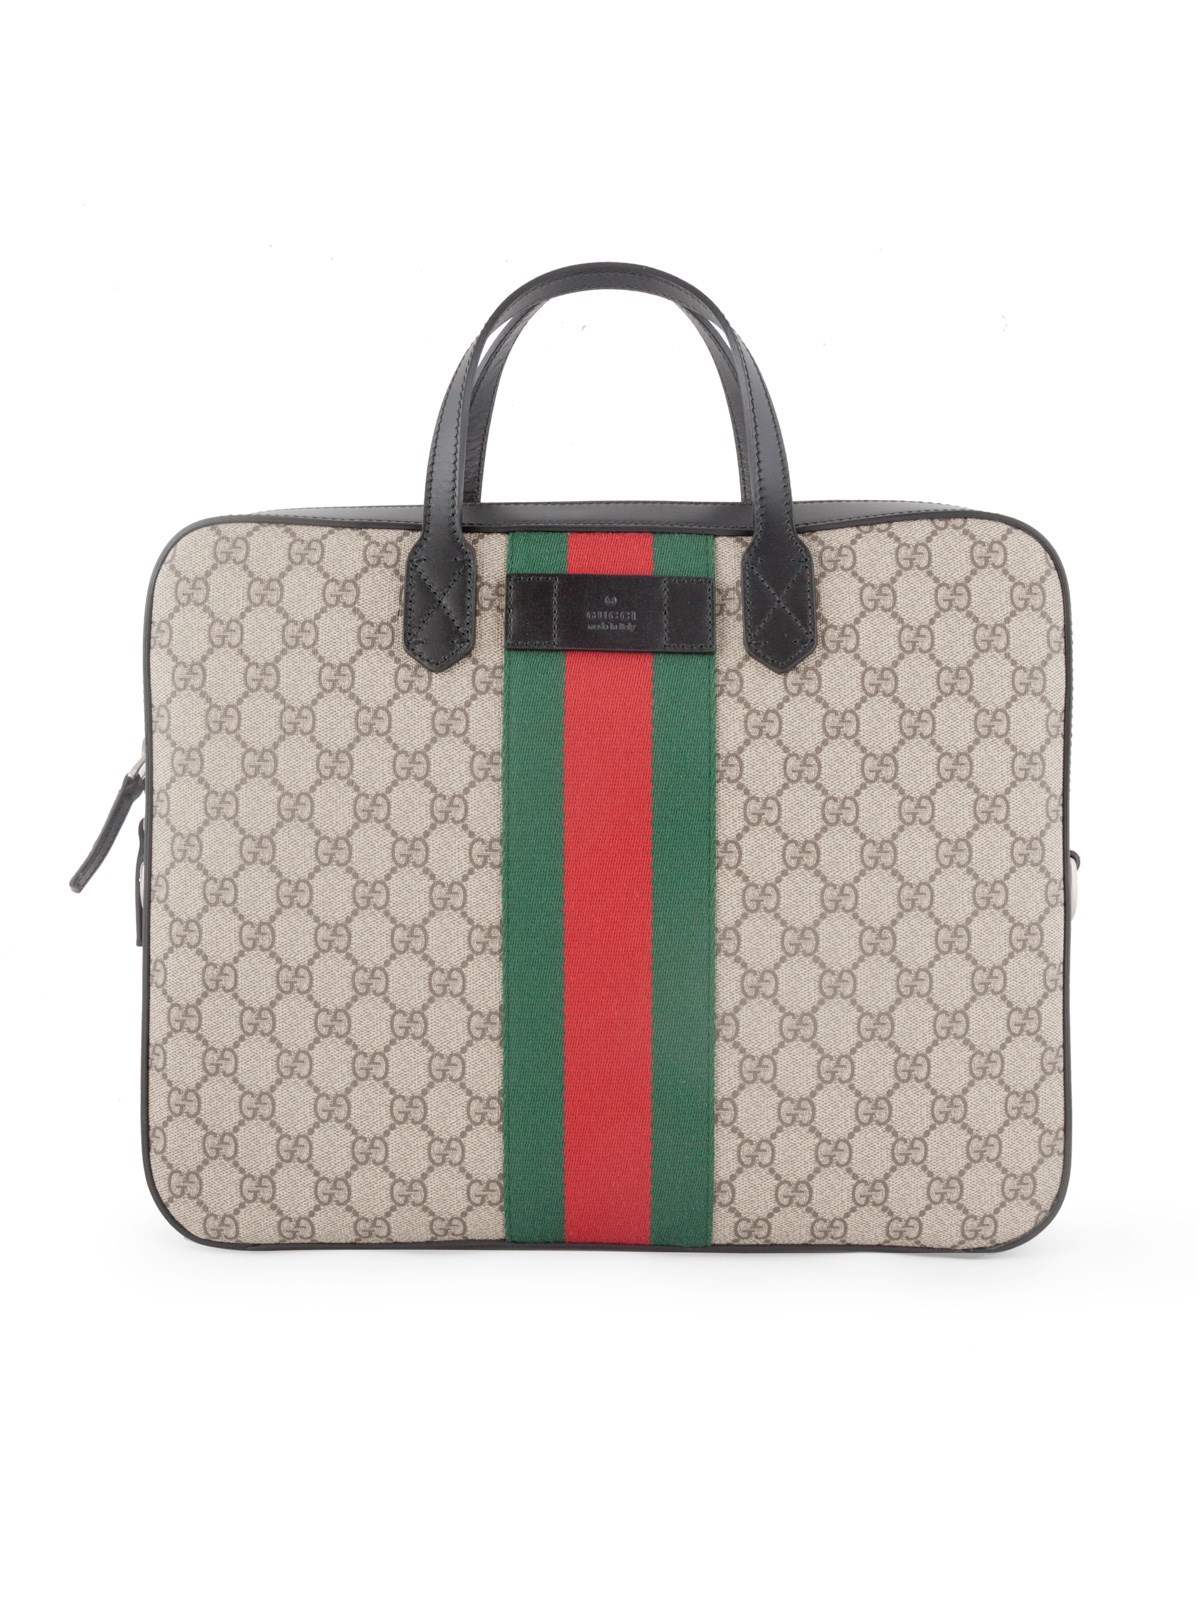 gucci WEB GG LAPTOP BAG available on 0 - 20856